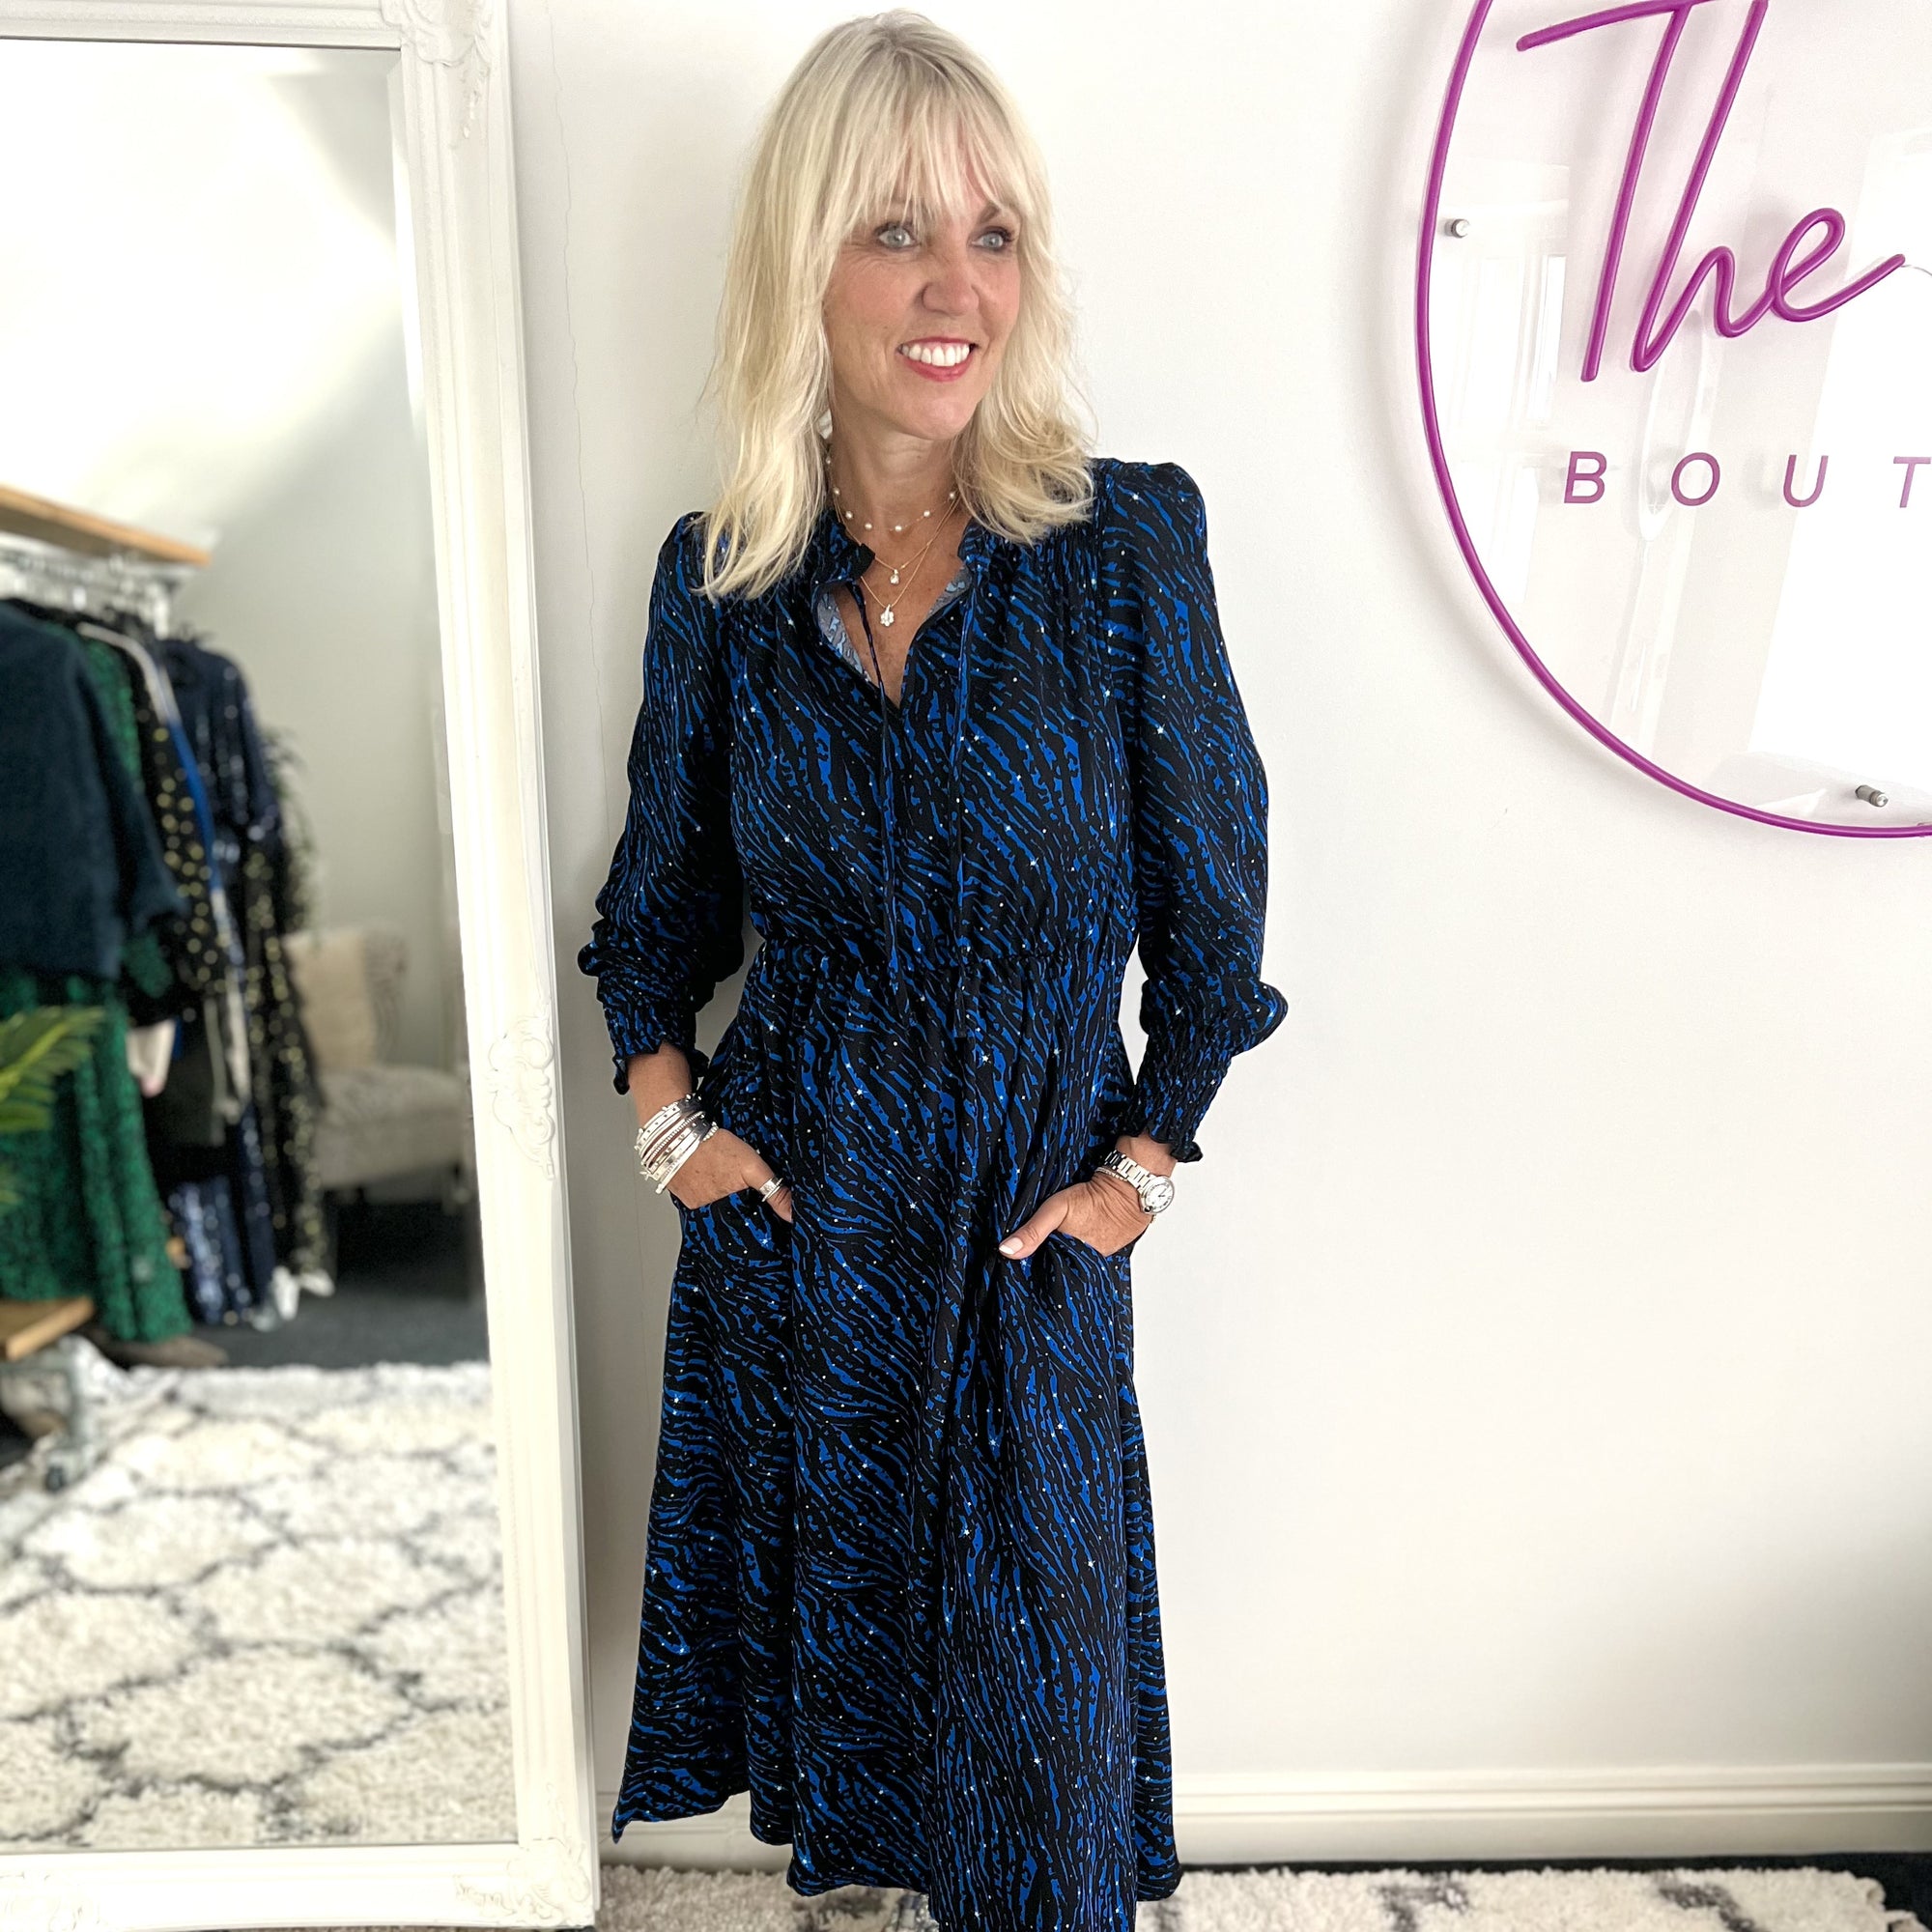 The Meek Boutique - Hand-picked clothing by stylist Lynne Meek